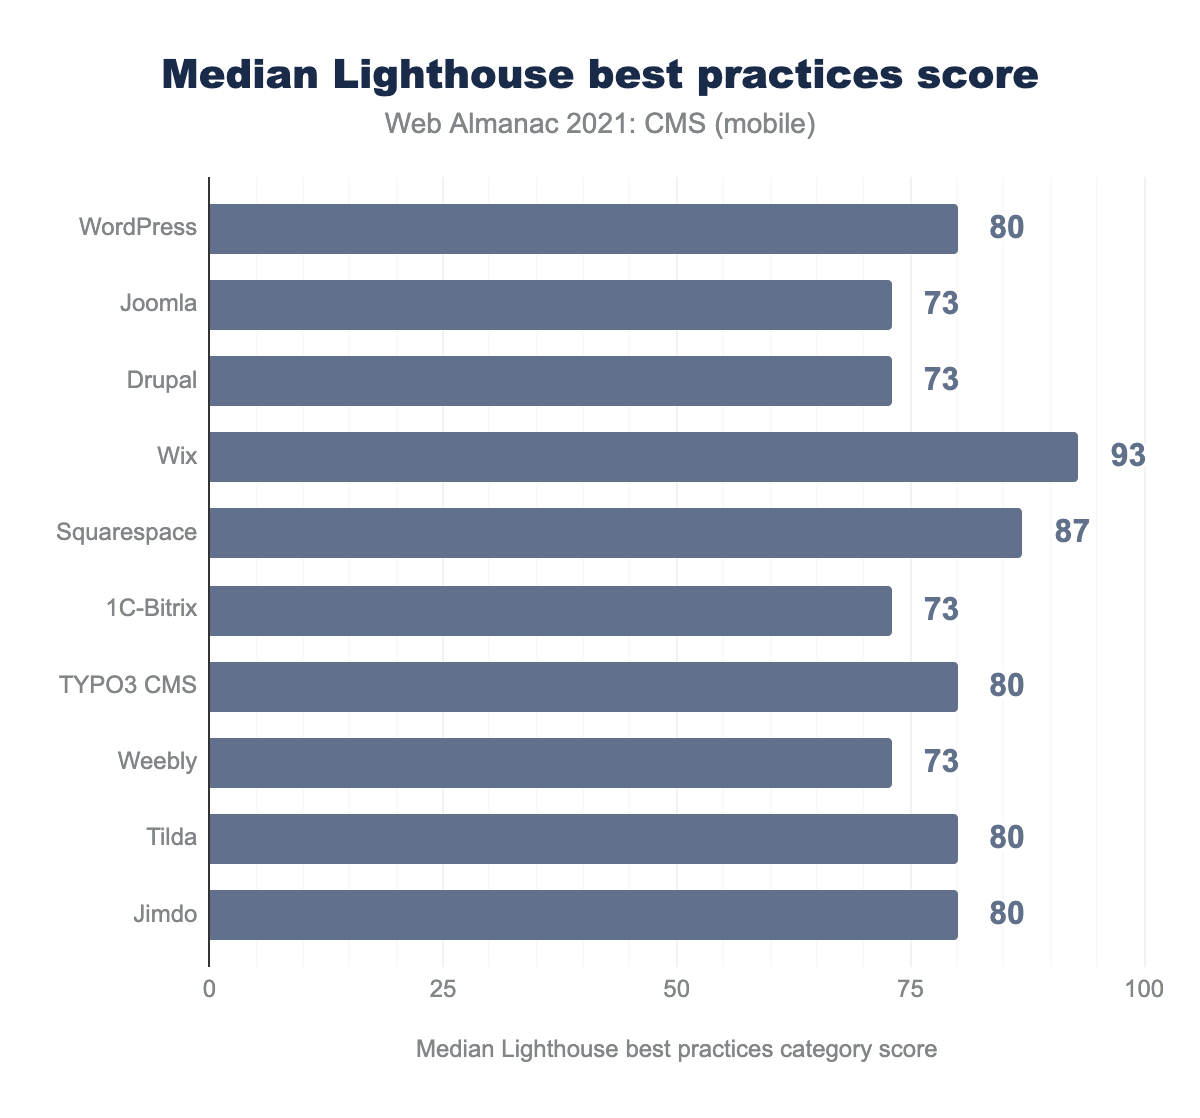 Top 10 CMSs median Lighthouse best practices score.